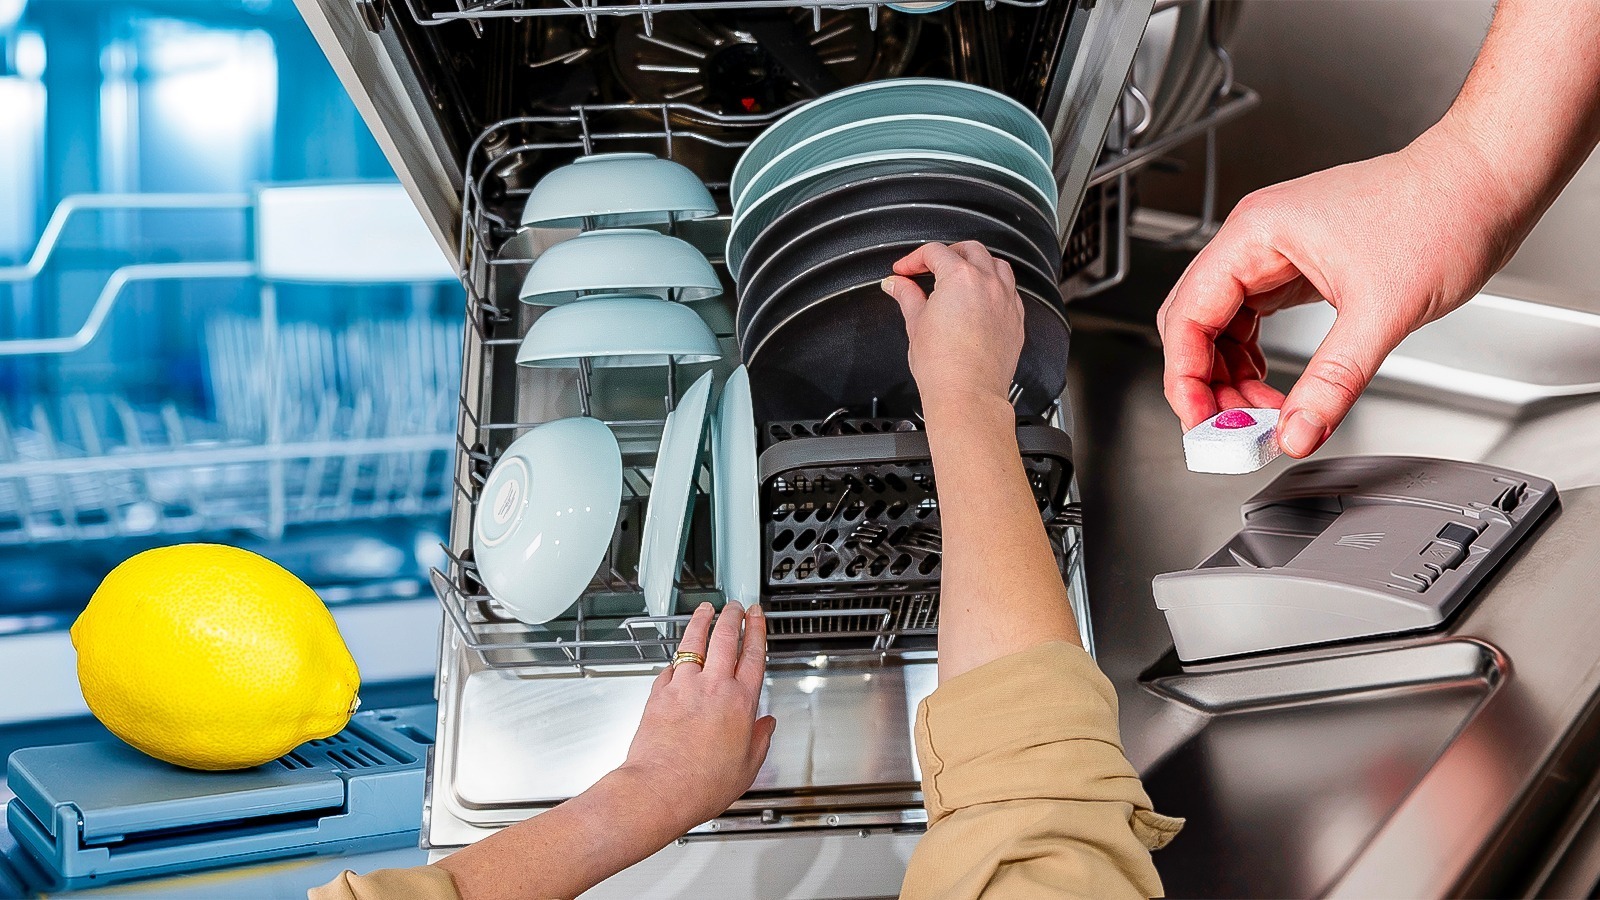 How to Wash Dishes by Hand Until They're Sparkling Clean